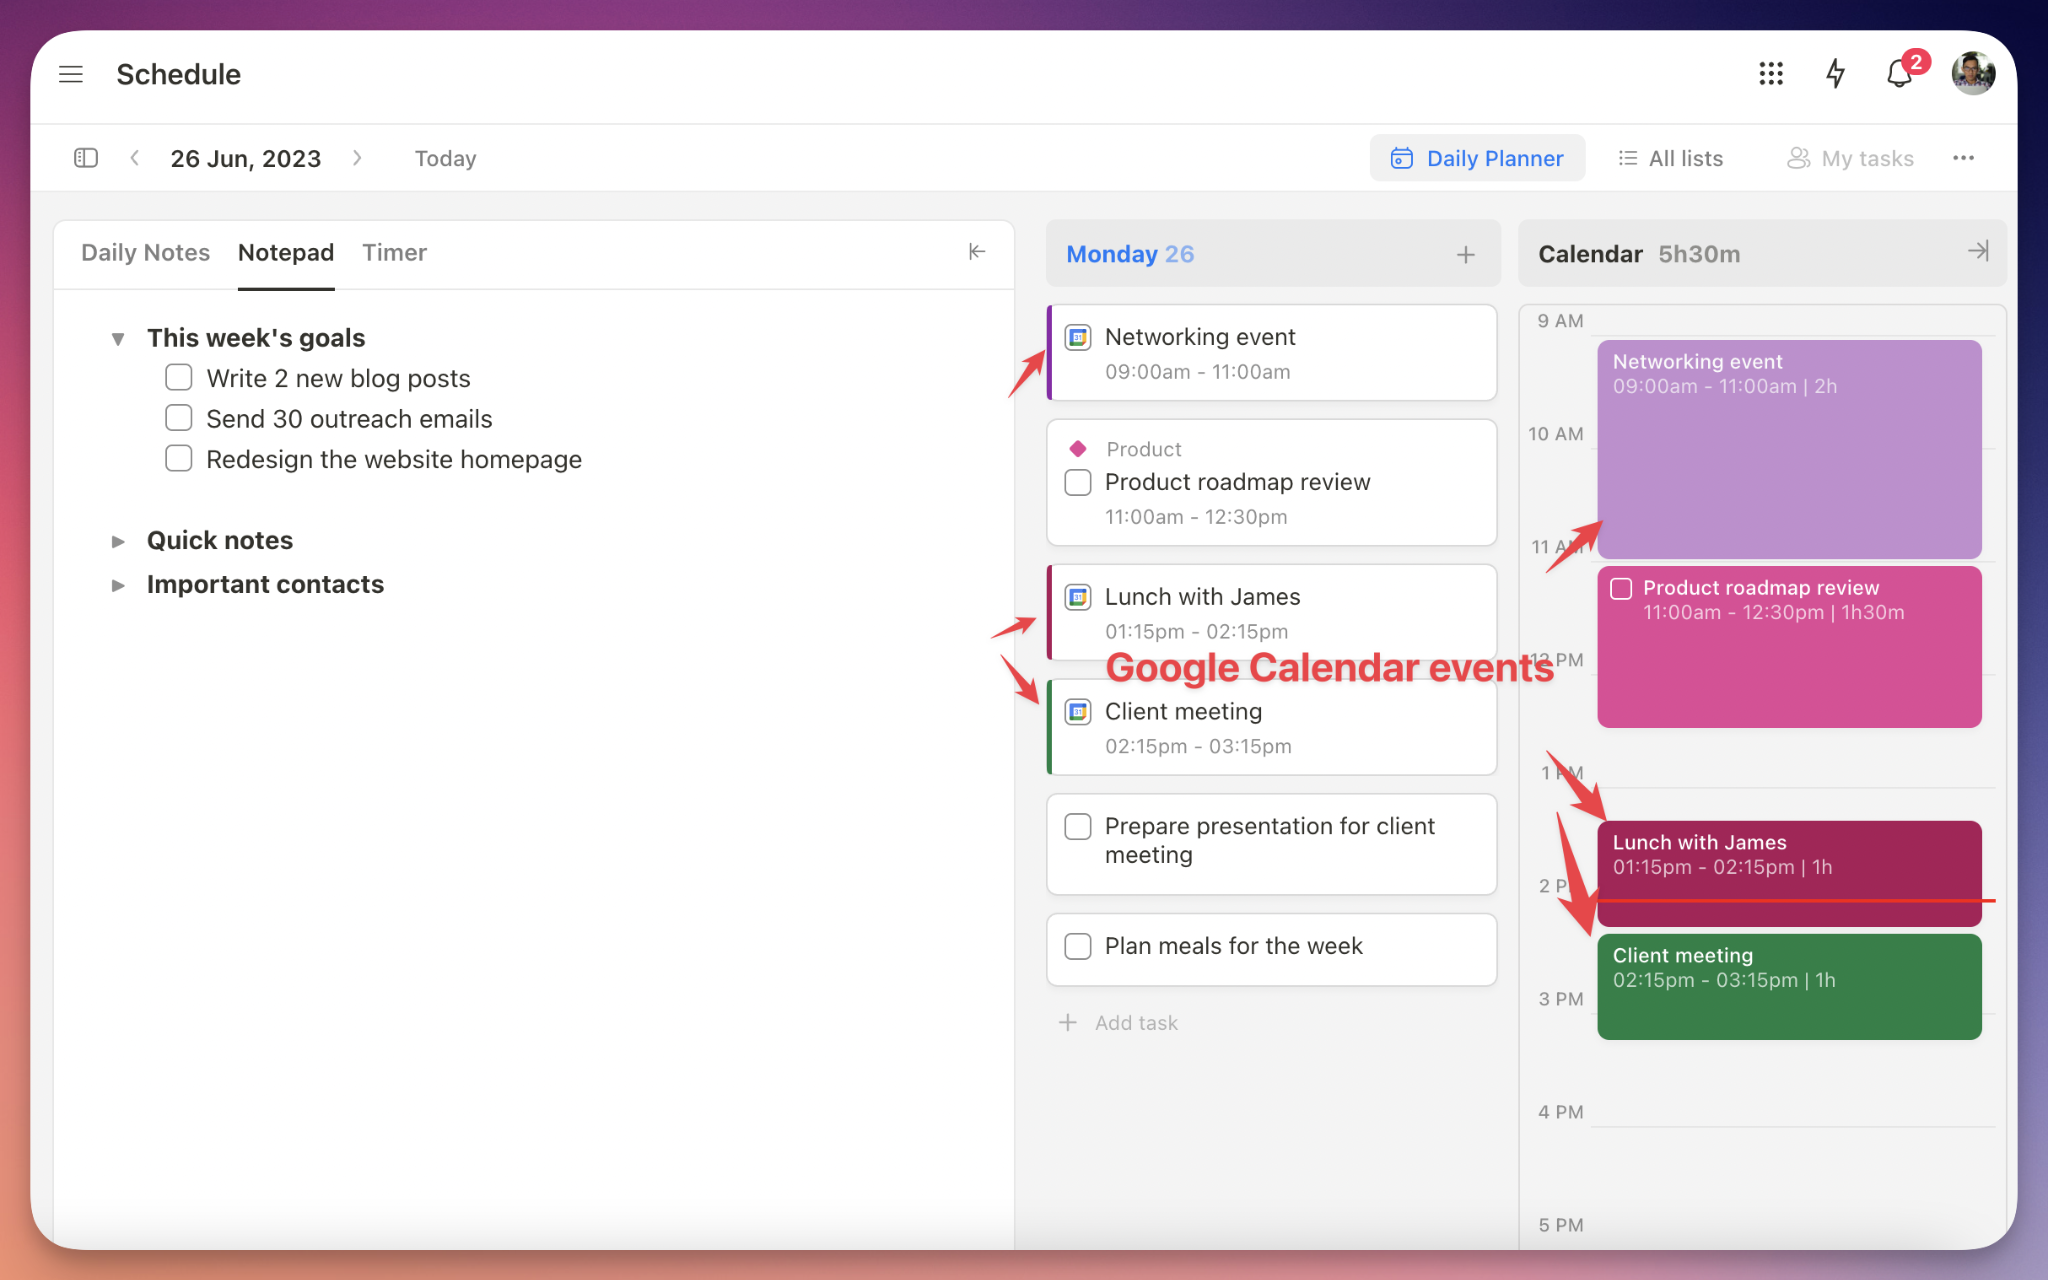 Upbase's deep integration with Google Calendar, making it one of the best scheduling tools for project management